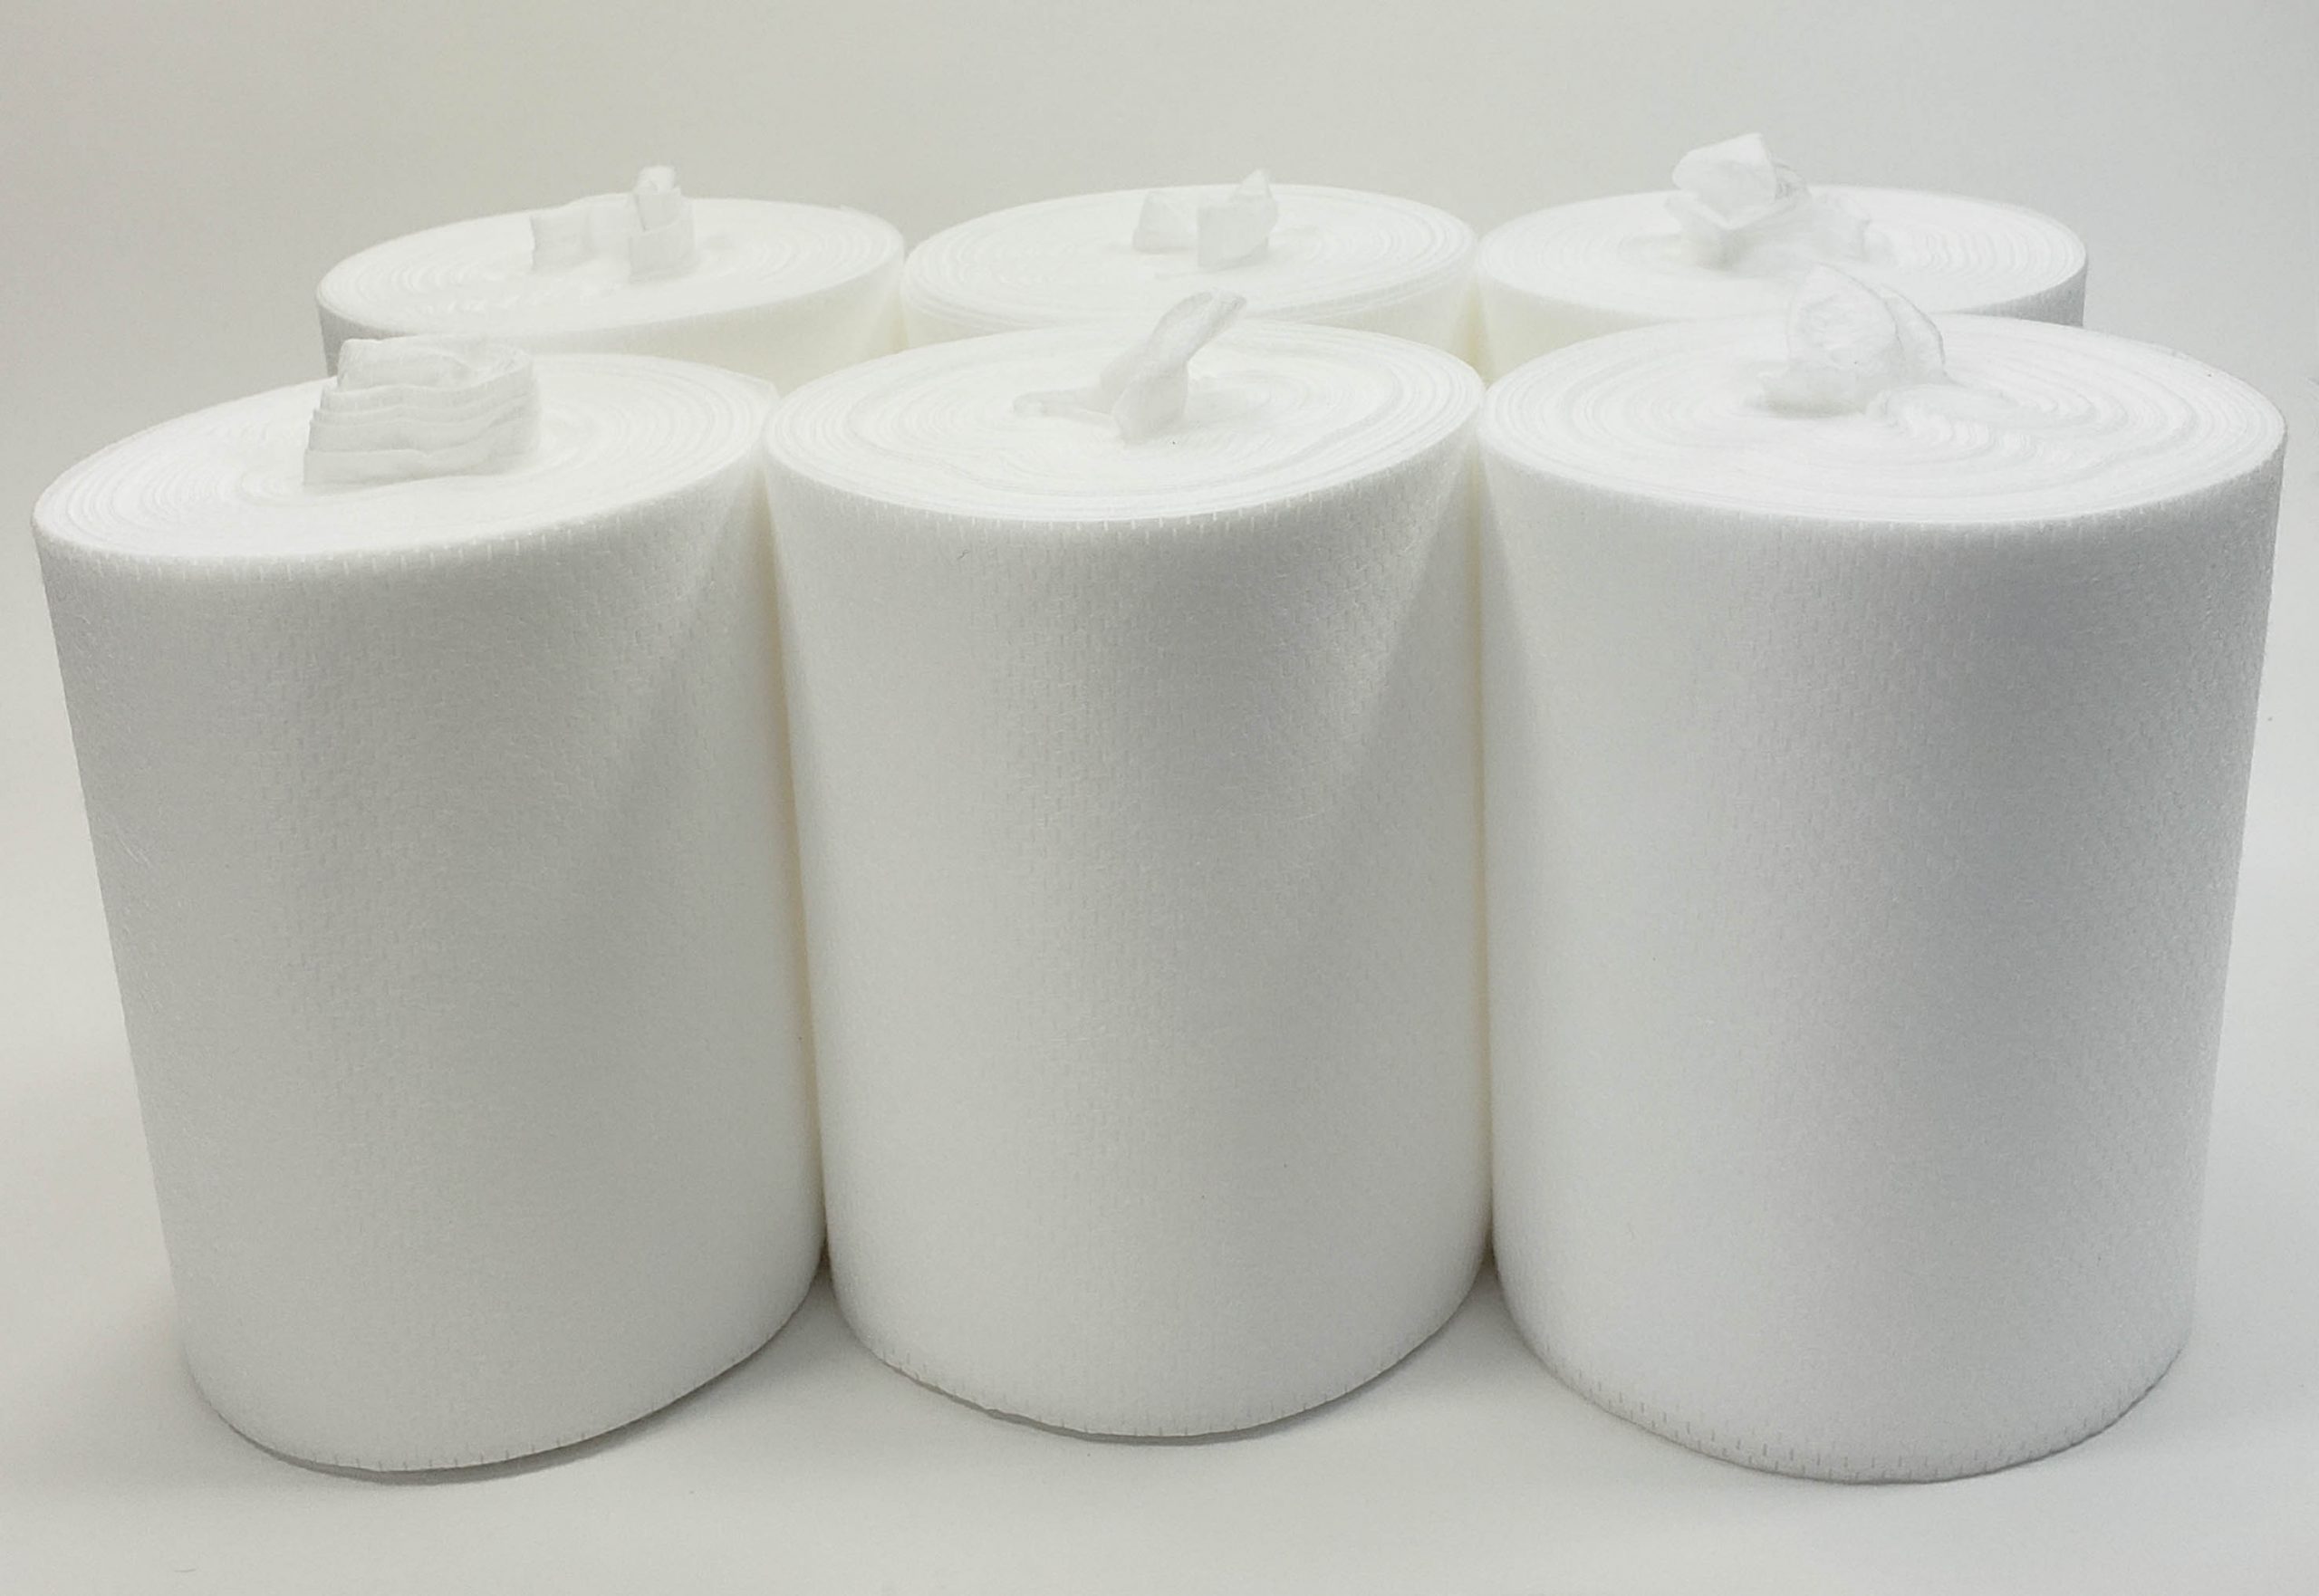 Infinity® Refillable Wiping System™ – Refill Rolls